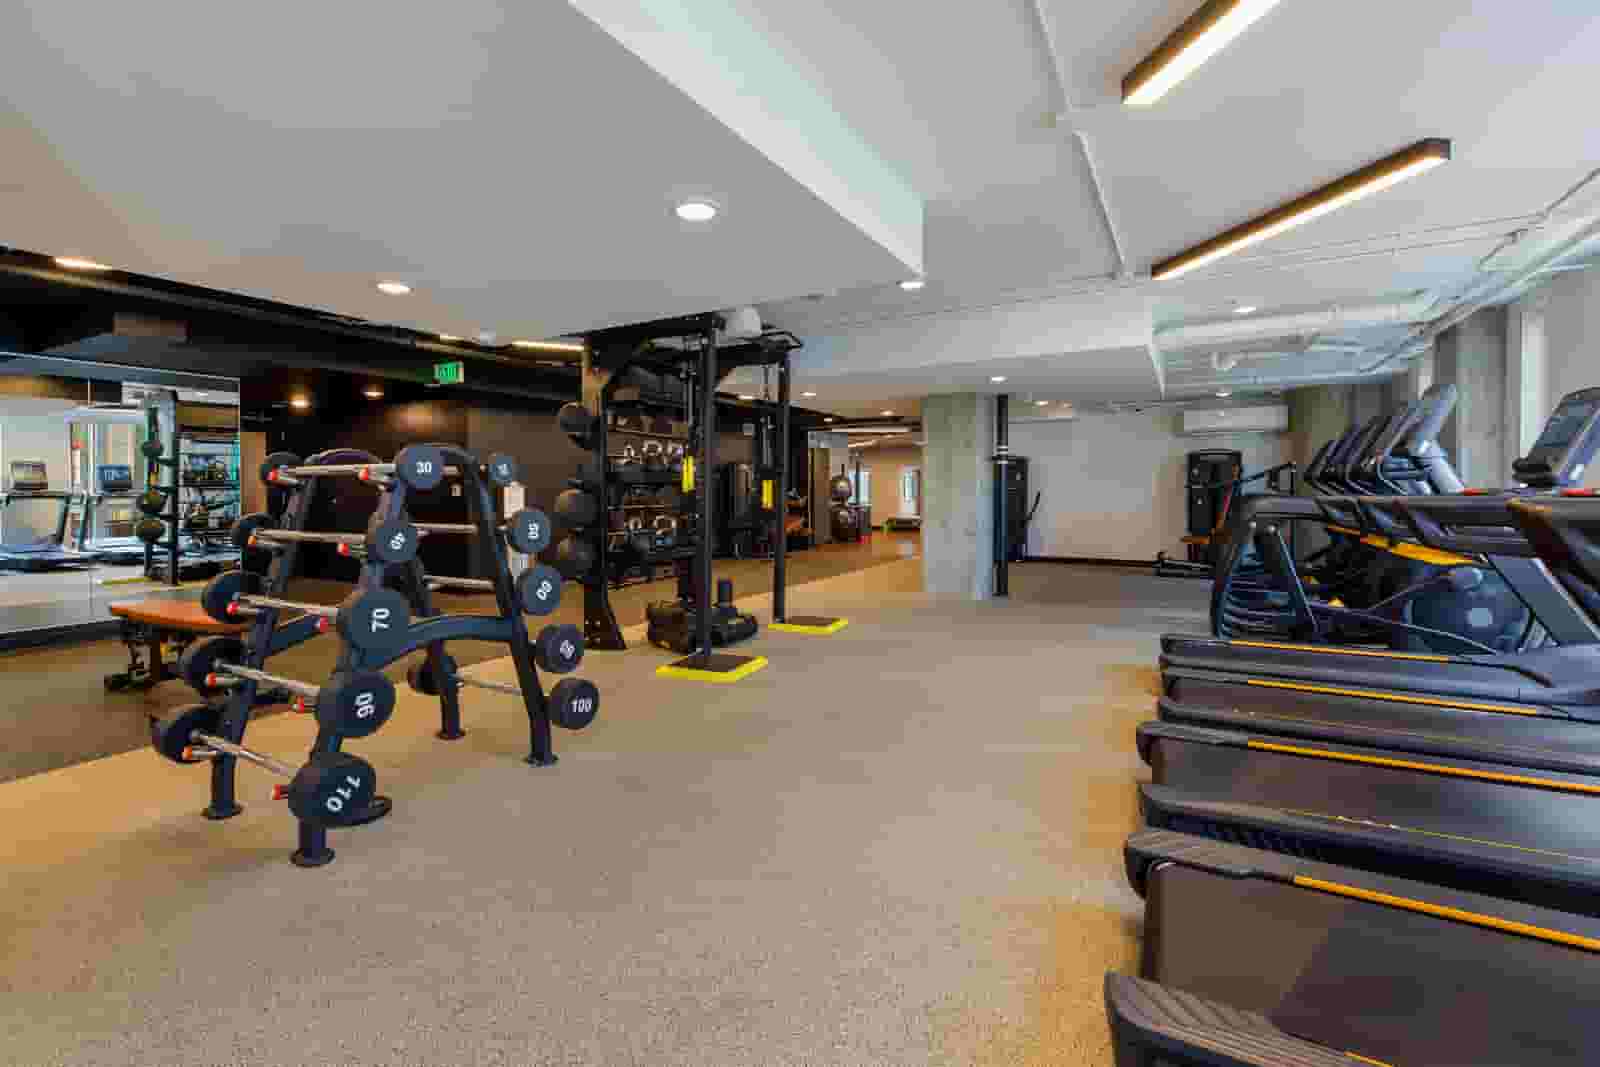 Hit your goals with strength training equipemnt and a Private Flex Fitness Room